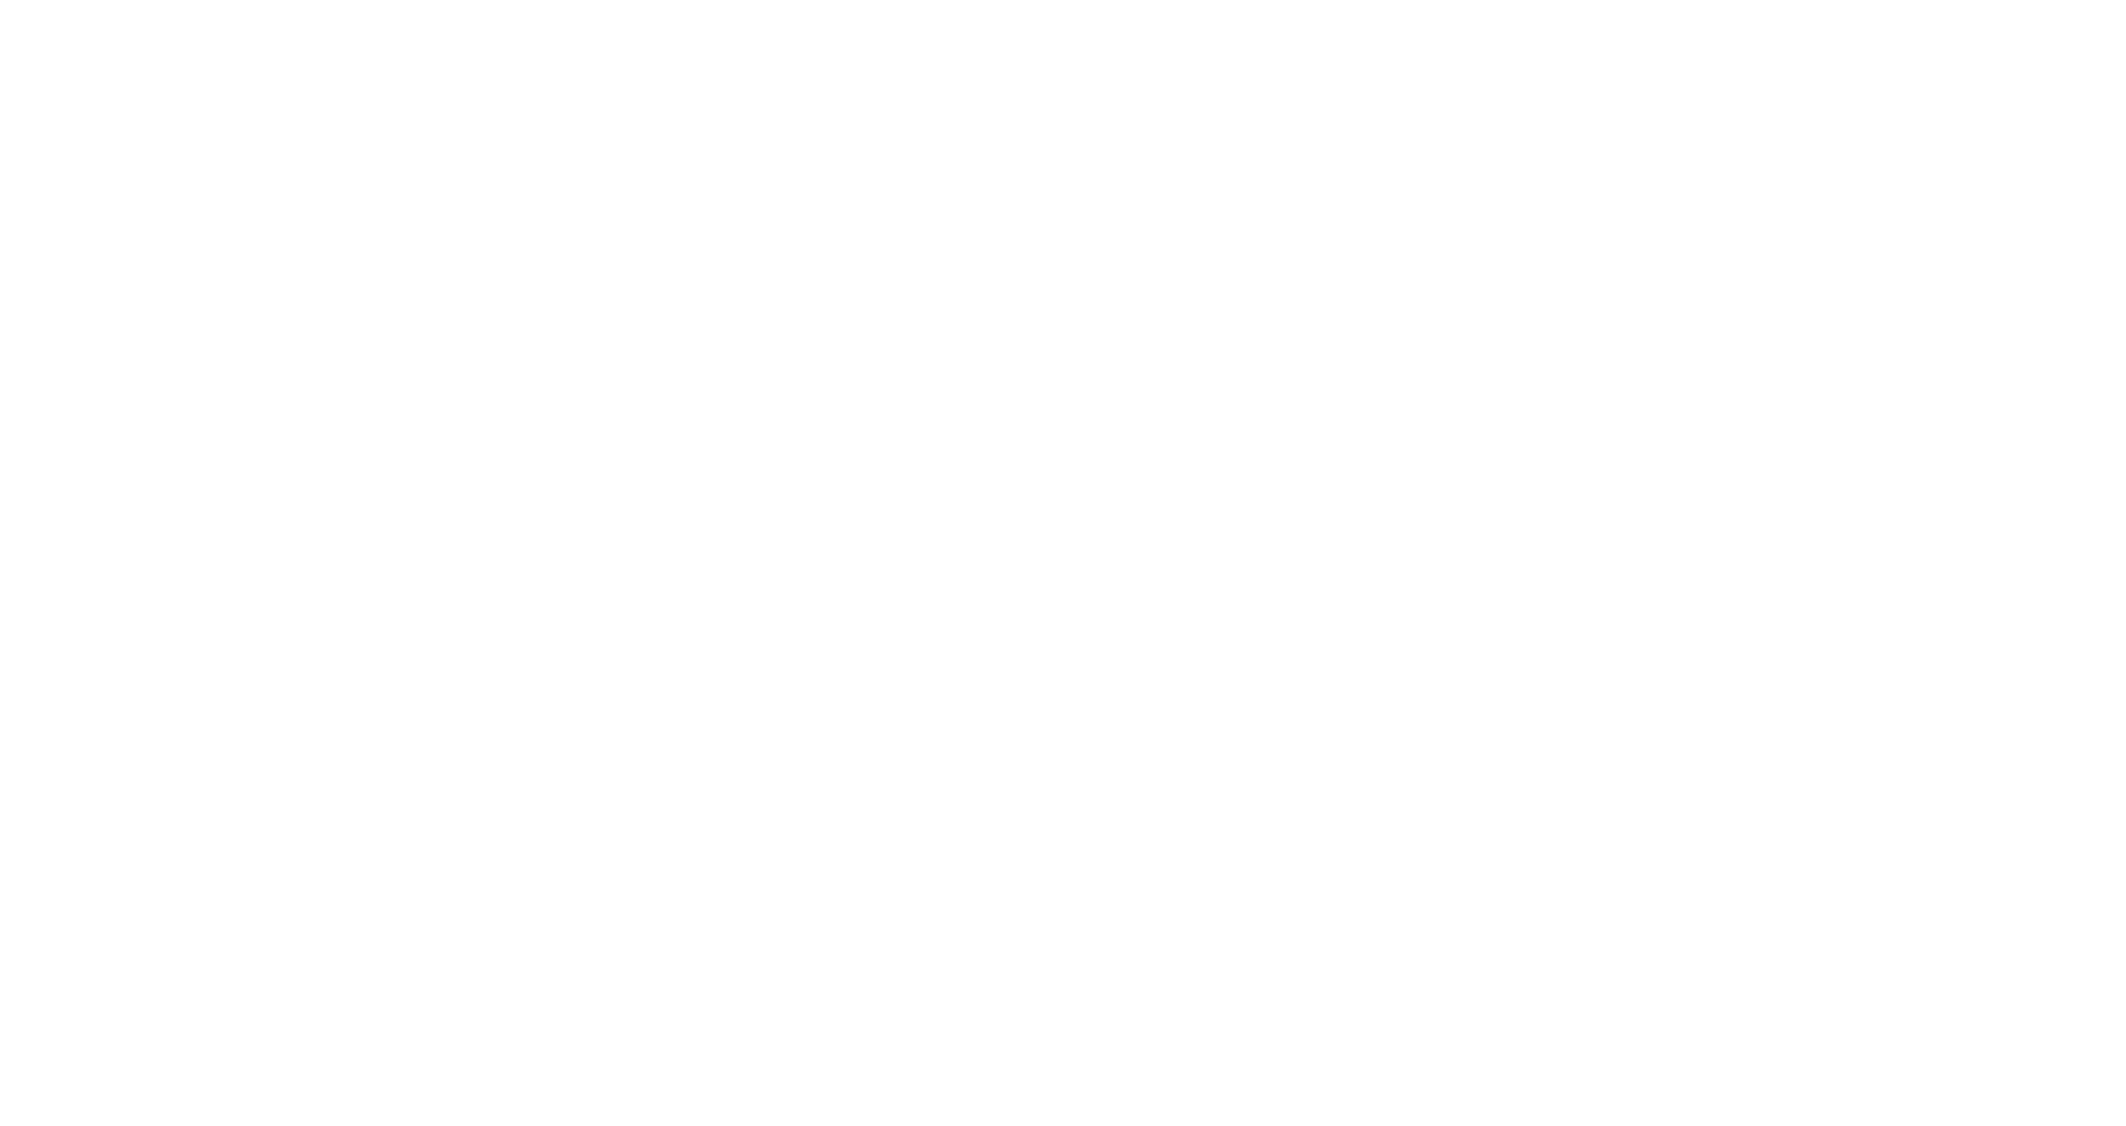 Clubessential Holdings